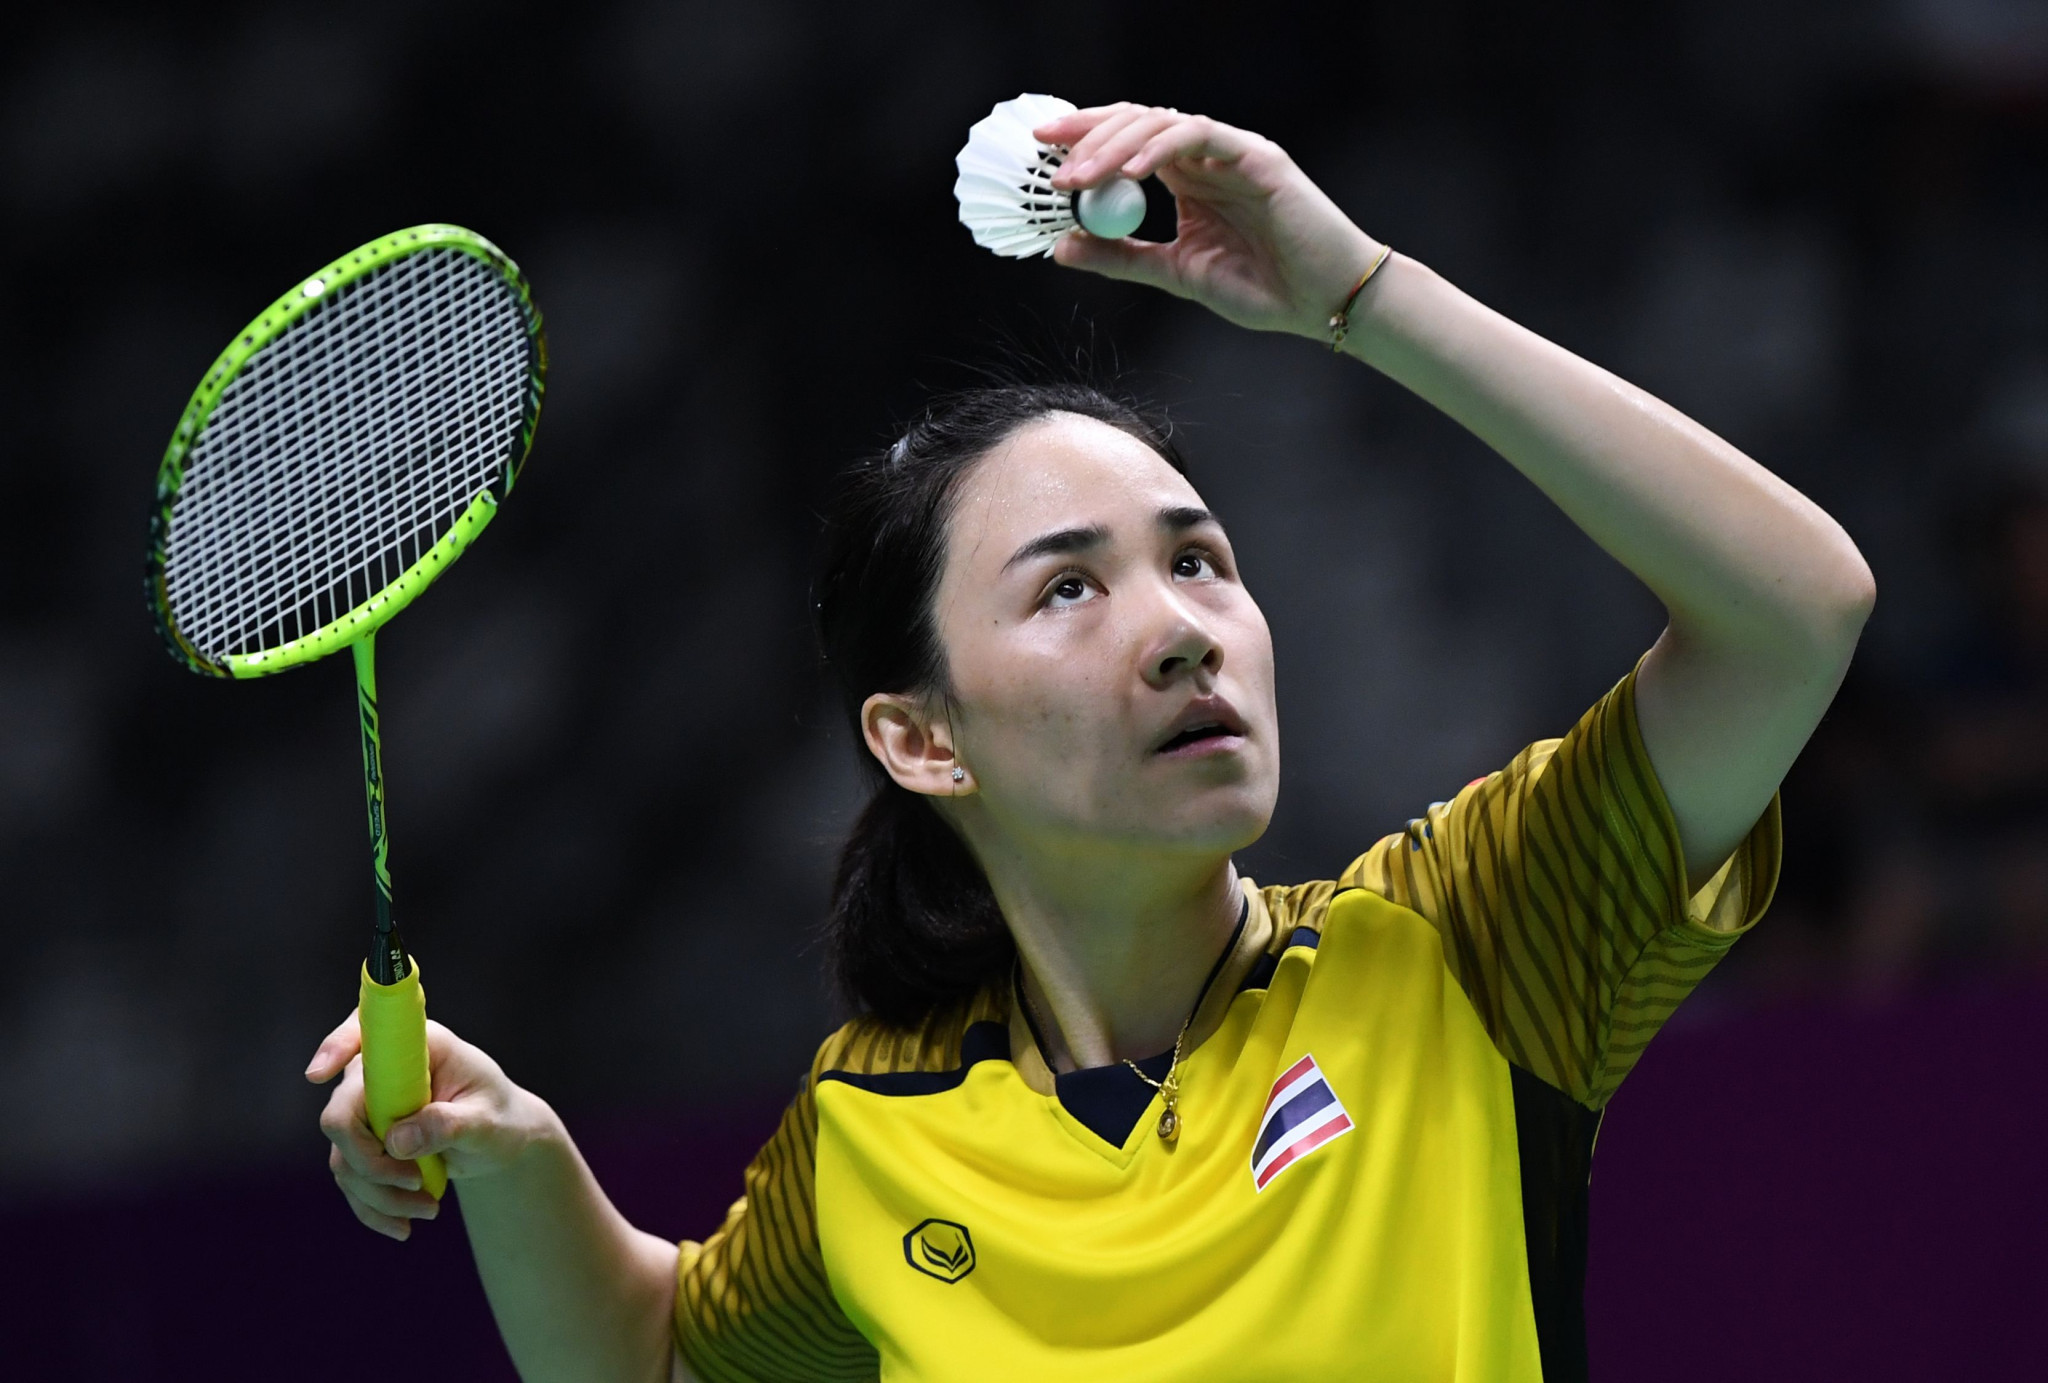 Women's singles top seed Nitchaon Jindapol of Thailand is safely through to the second round ©Getty Images